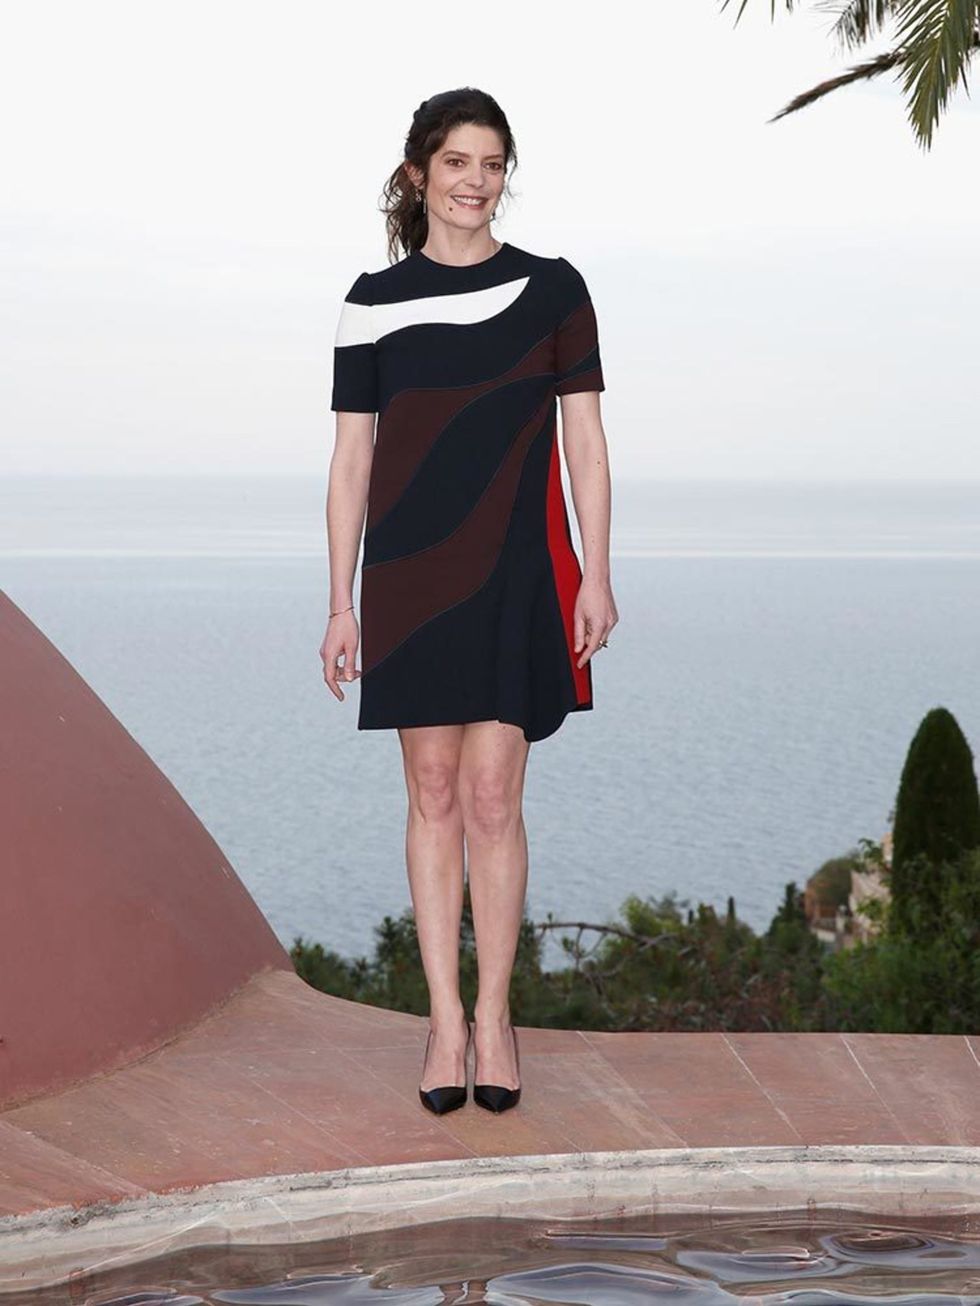 Dakota Fanning attends the Dior Cruise 2016 Collection show at Le Palais Bulles, May 2015.